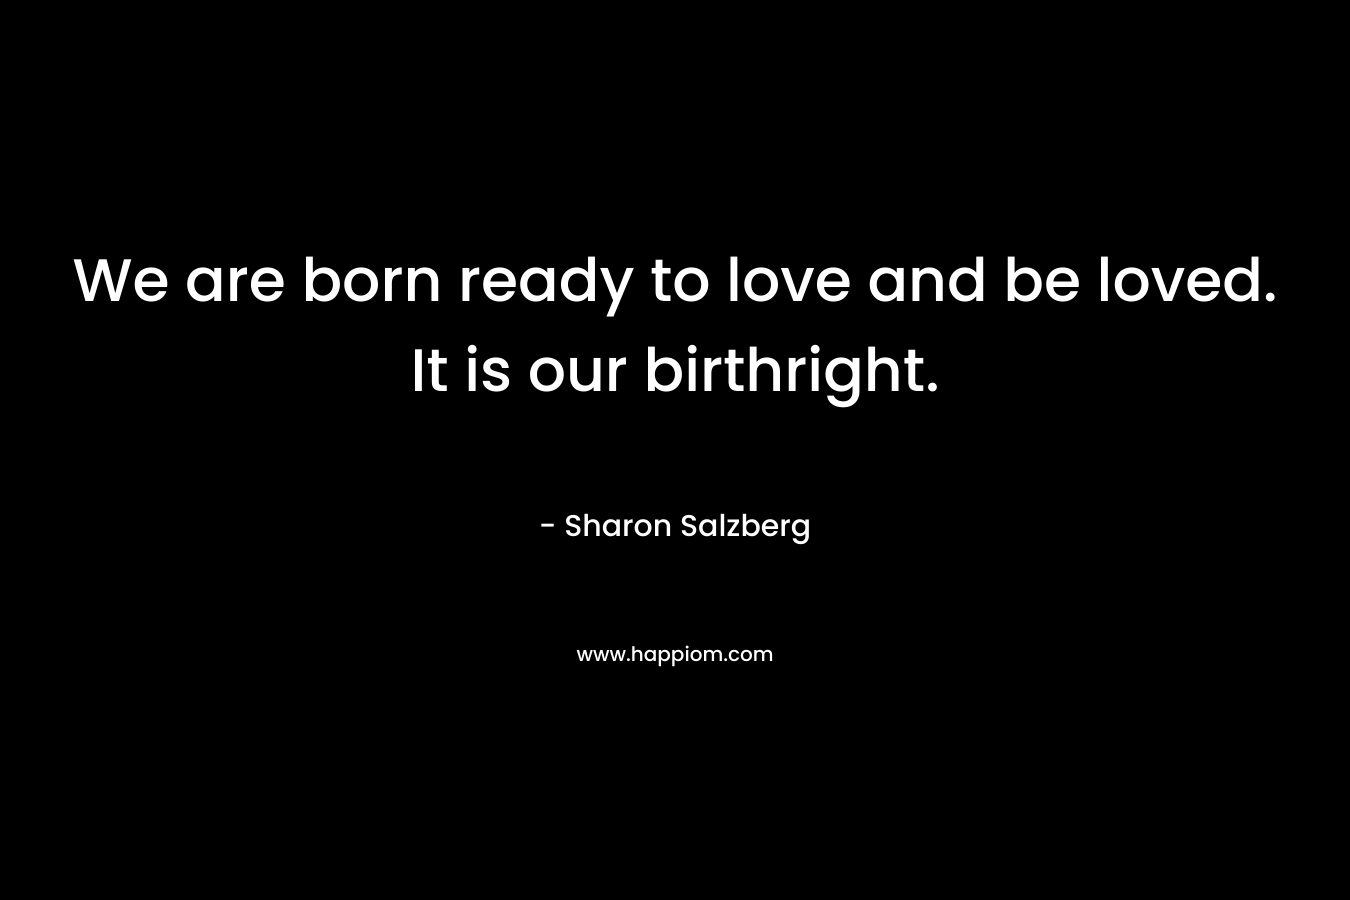 We are born ready to love and be loved. It is our birthright.